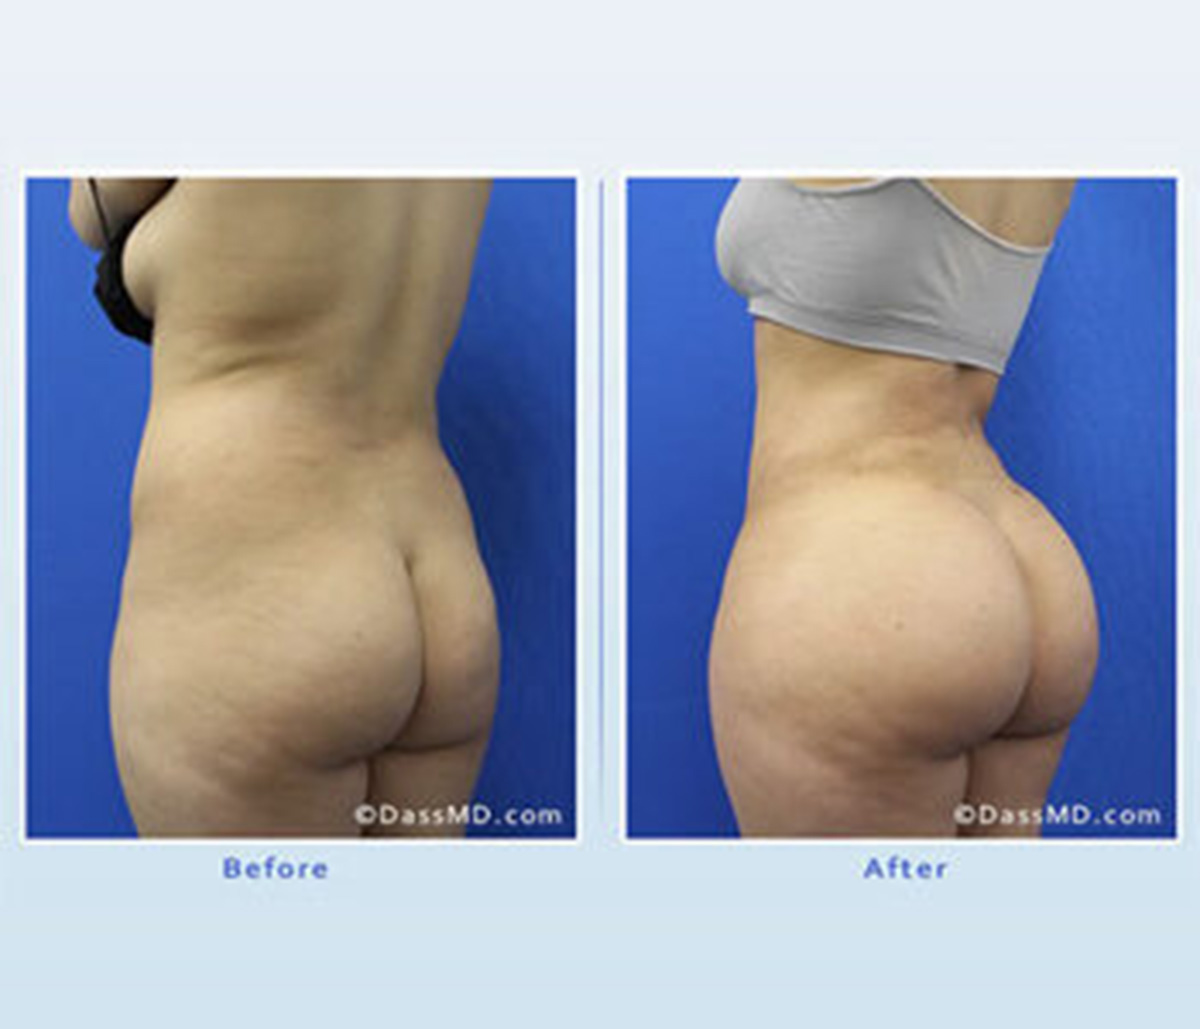 Brazilian butt lift surgery helps patients achieve a shapelier body with curves